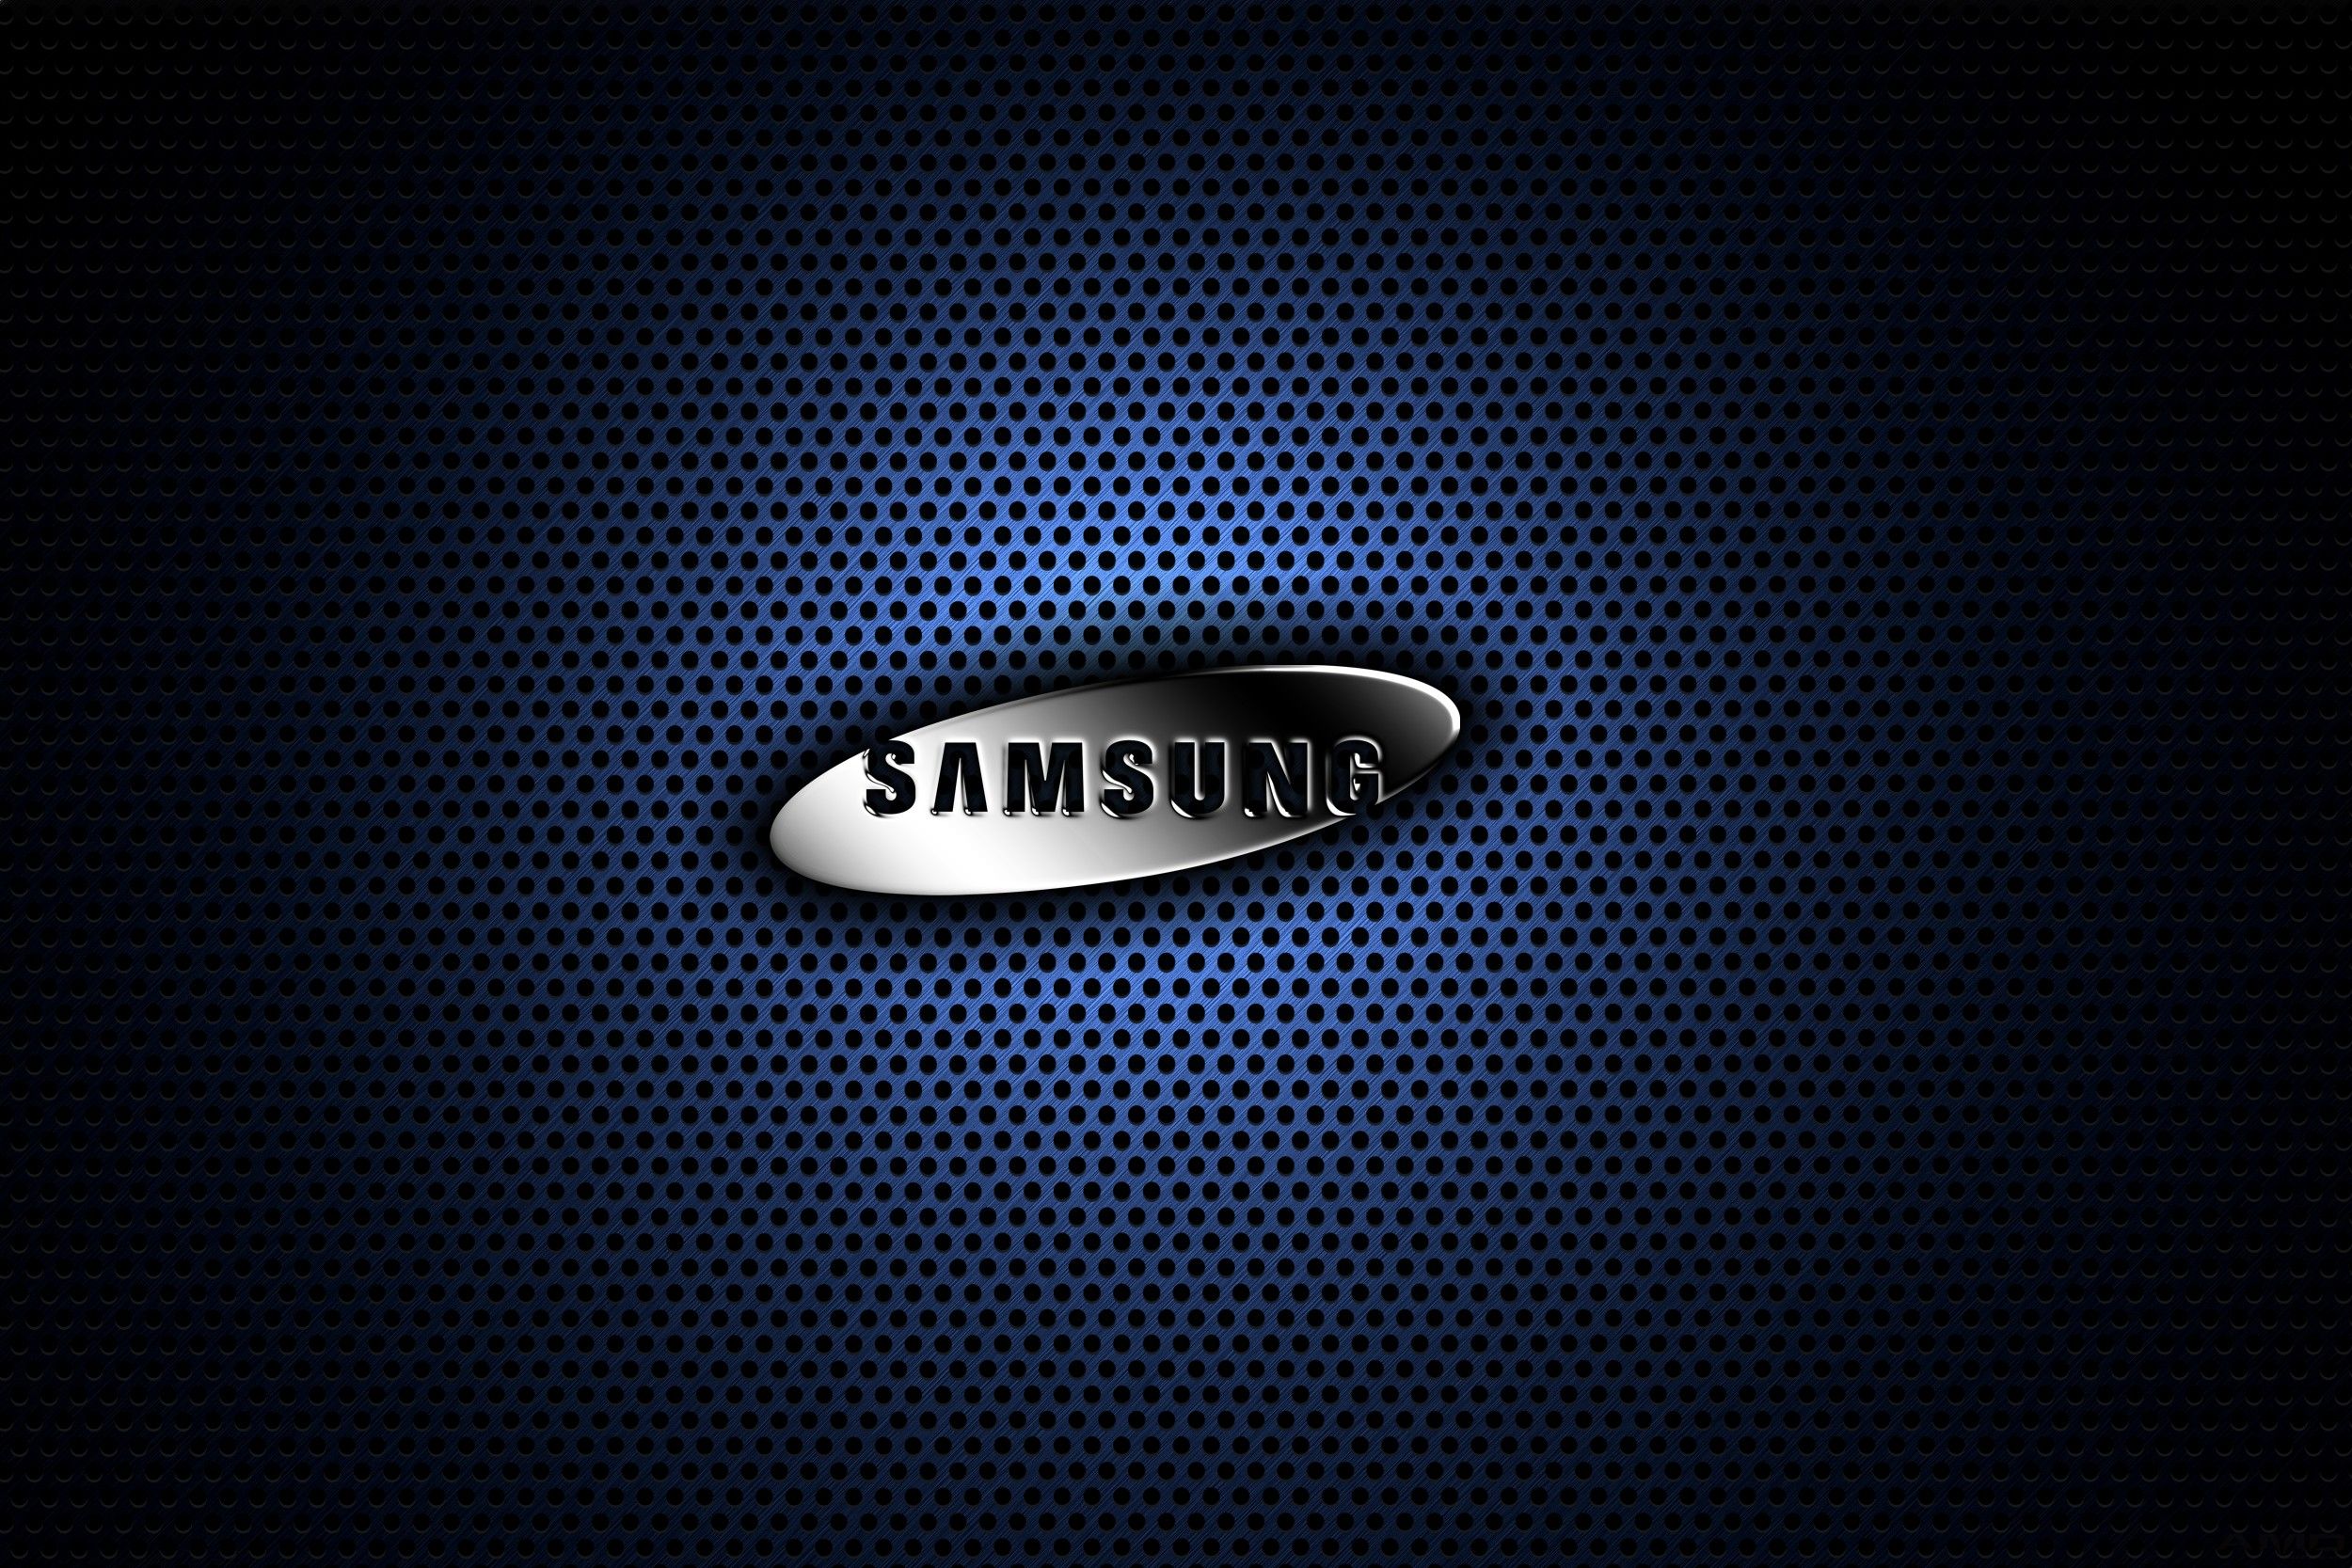 Samsung Logo Image HD Wallpaper Background For Pc Puter